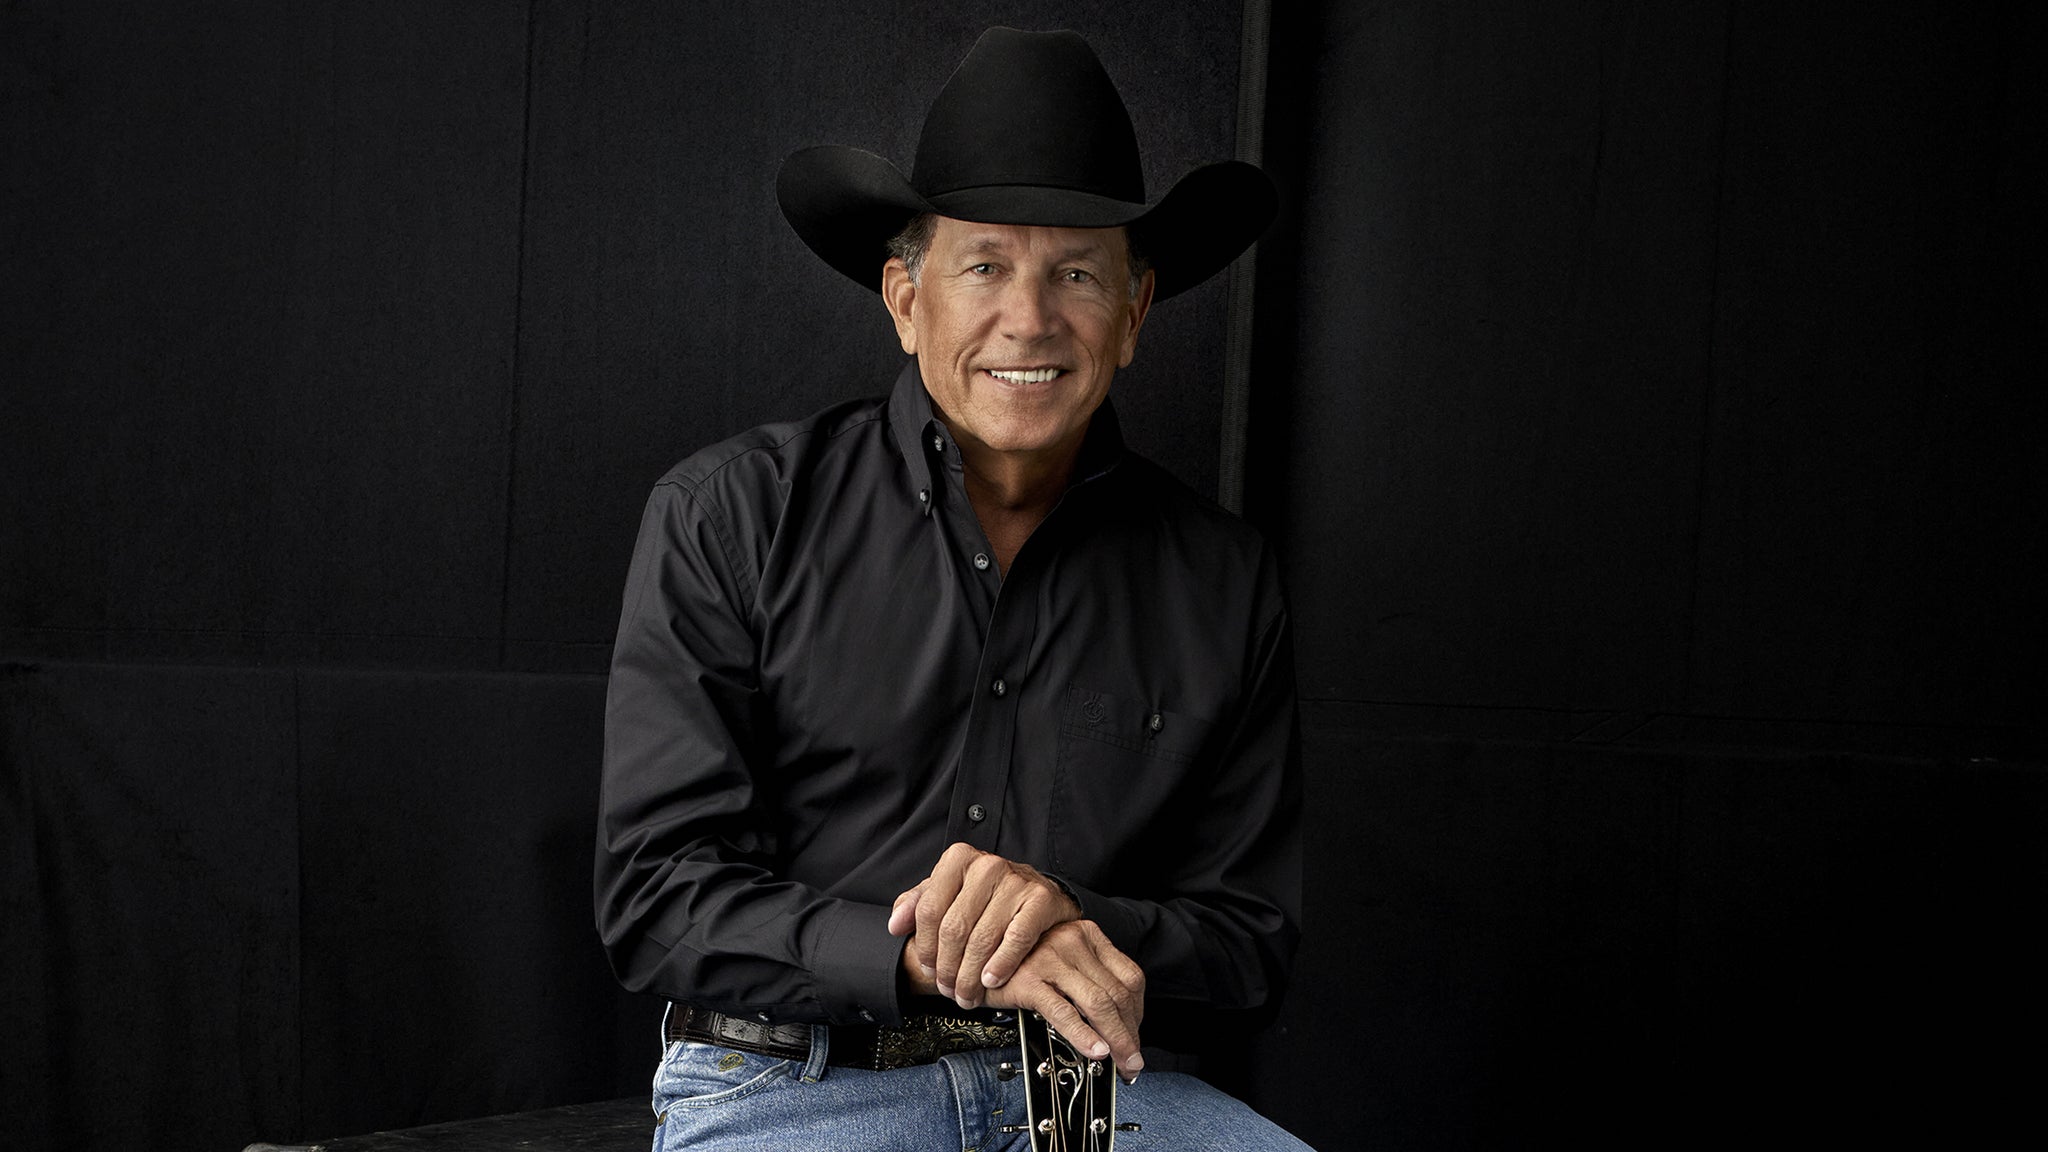 working presale code for George Strait face value tickets in Indianapolis